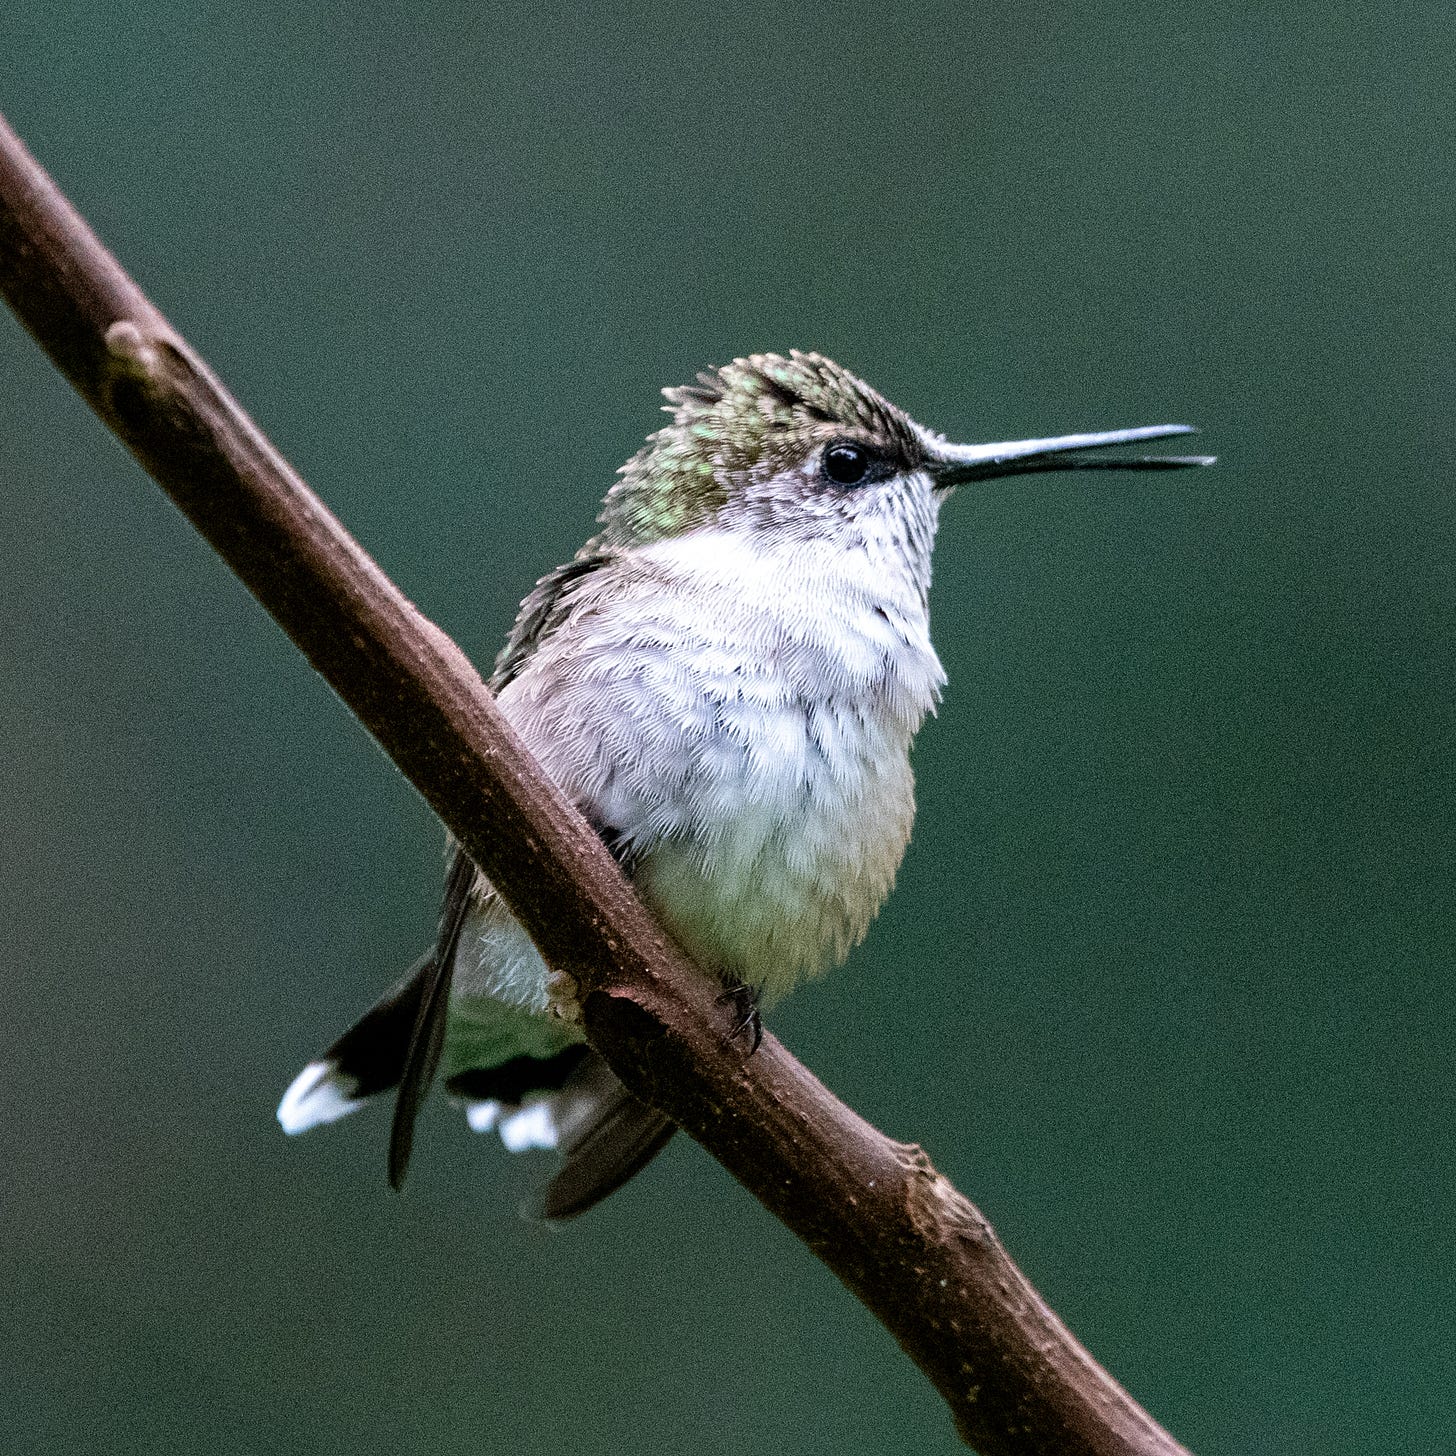 A perched hummingbird with an emerald cap and a gray breast, its beak slightly open